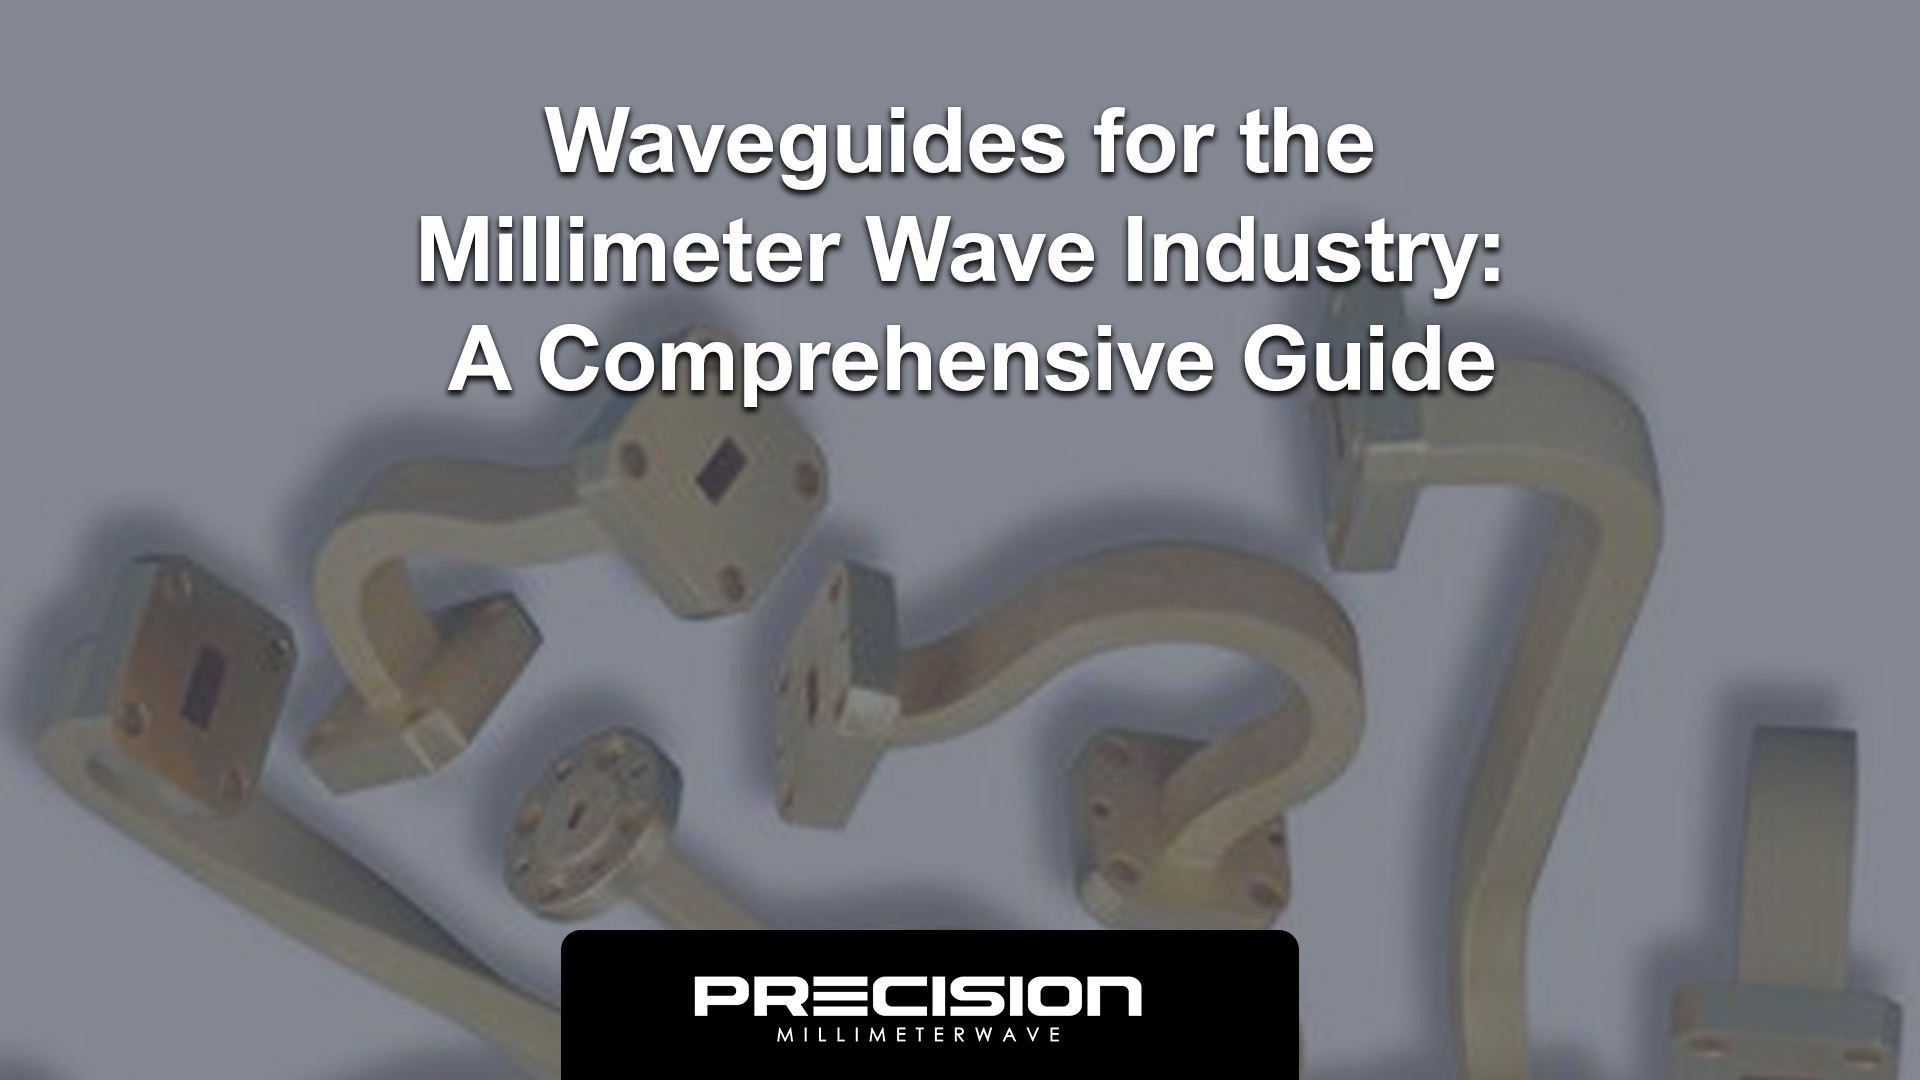 Waveguides for the Millimeter Wave Industry A Comprehensive Guide